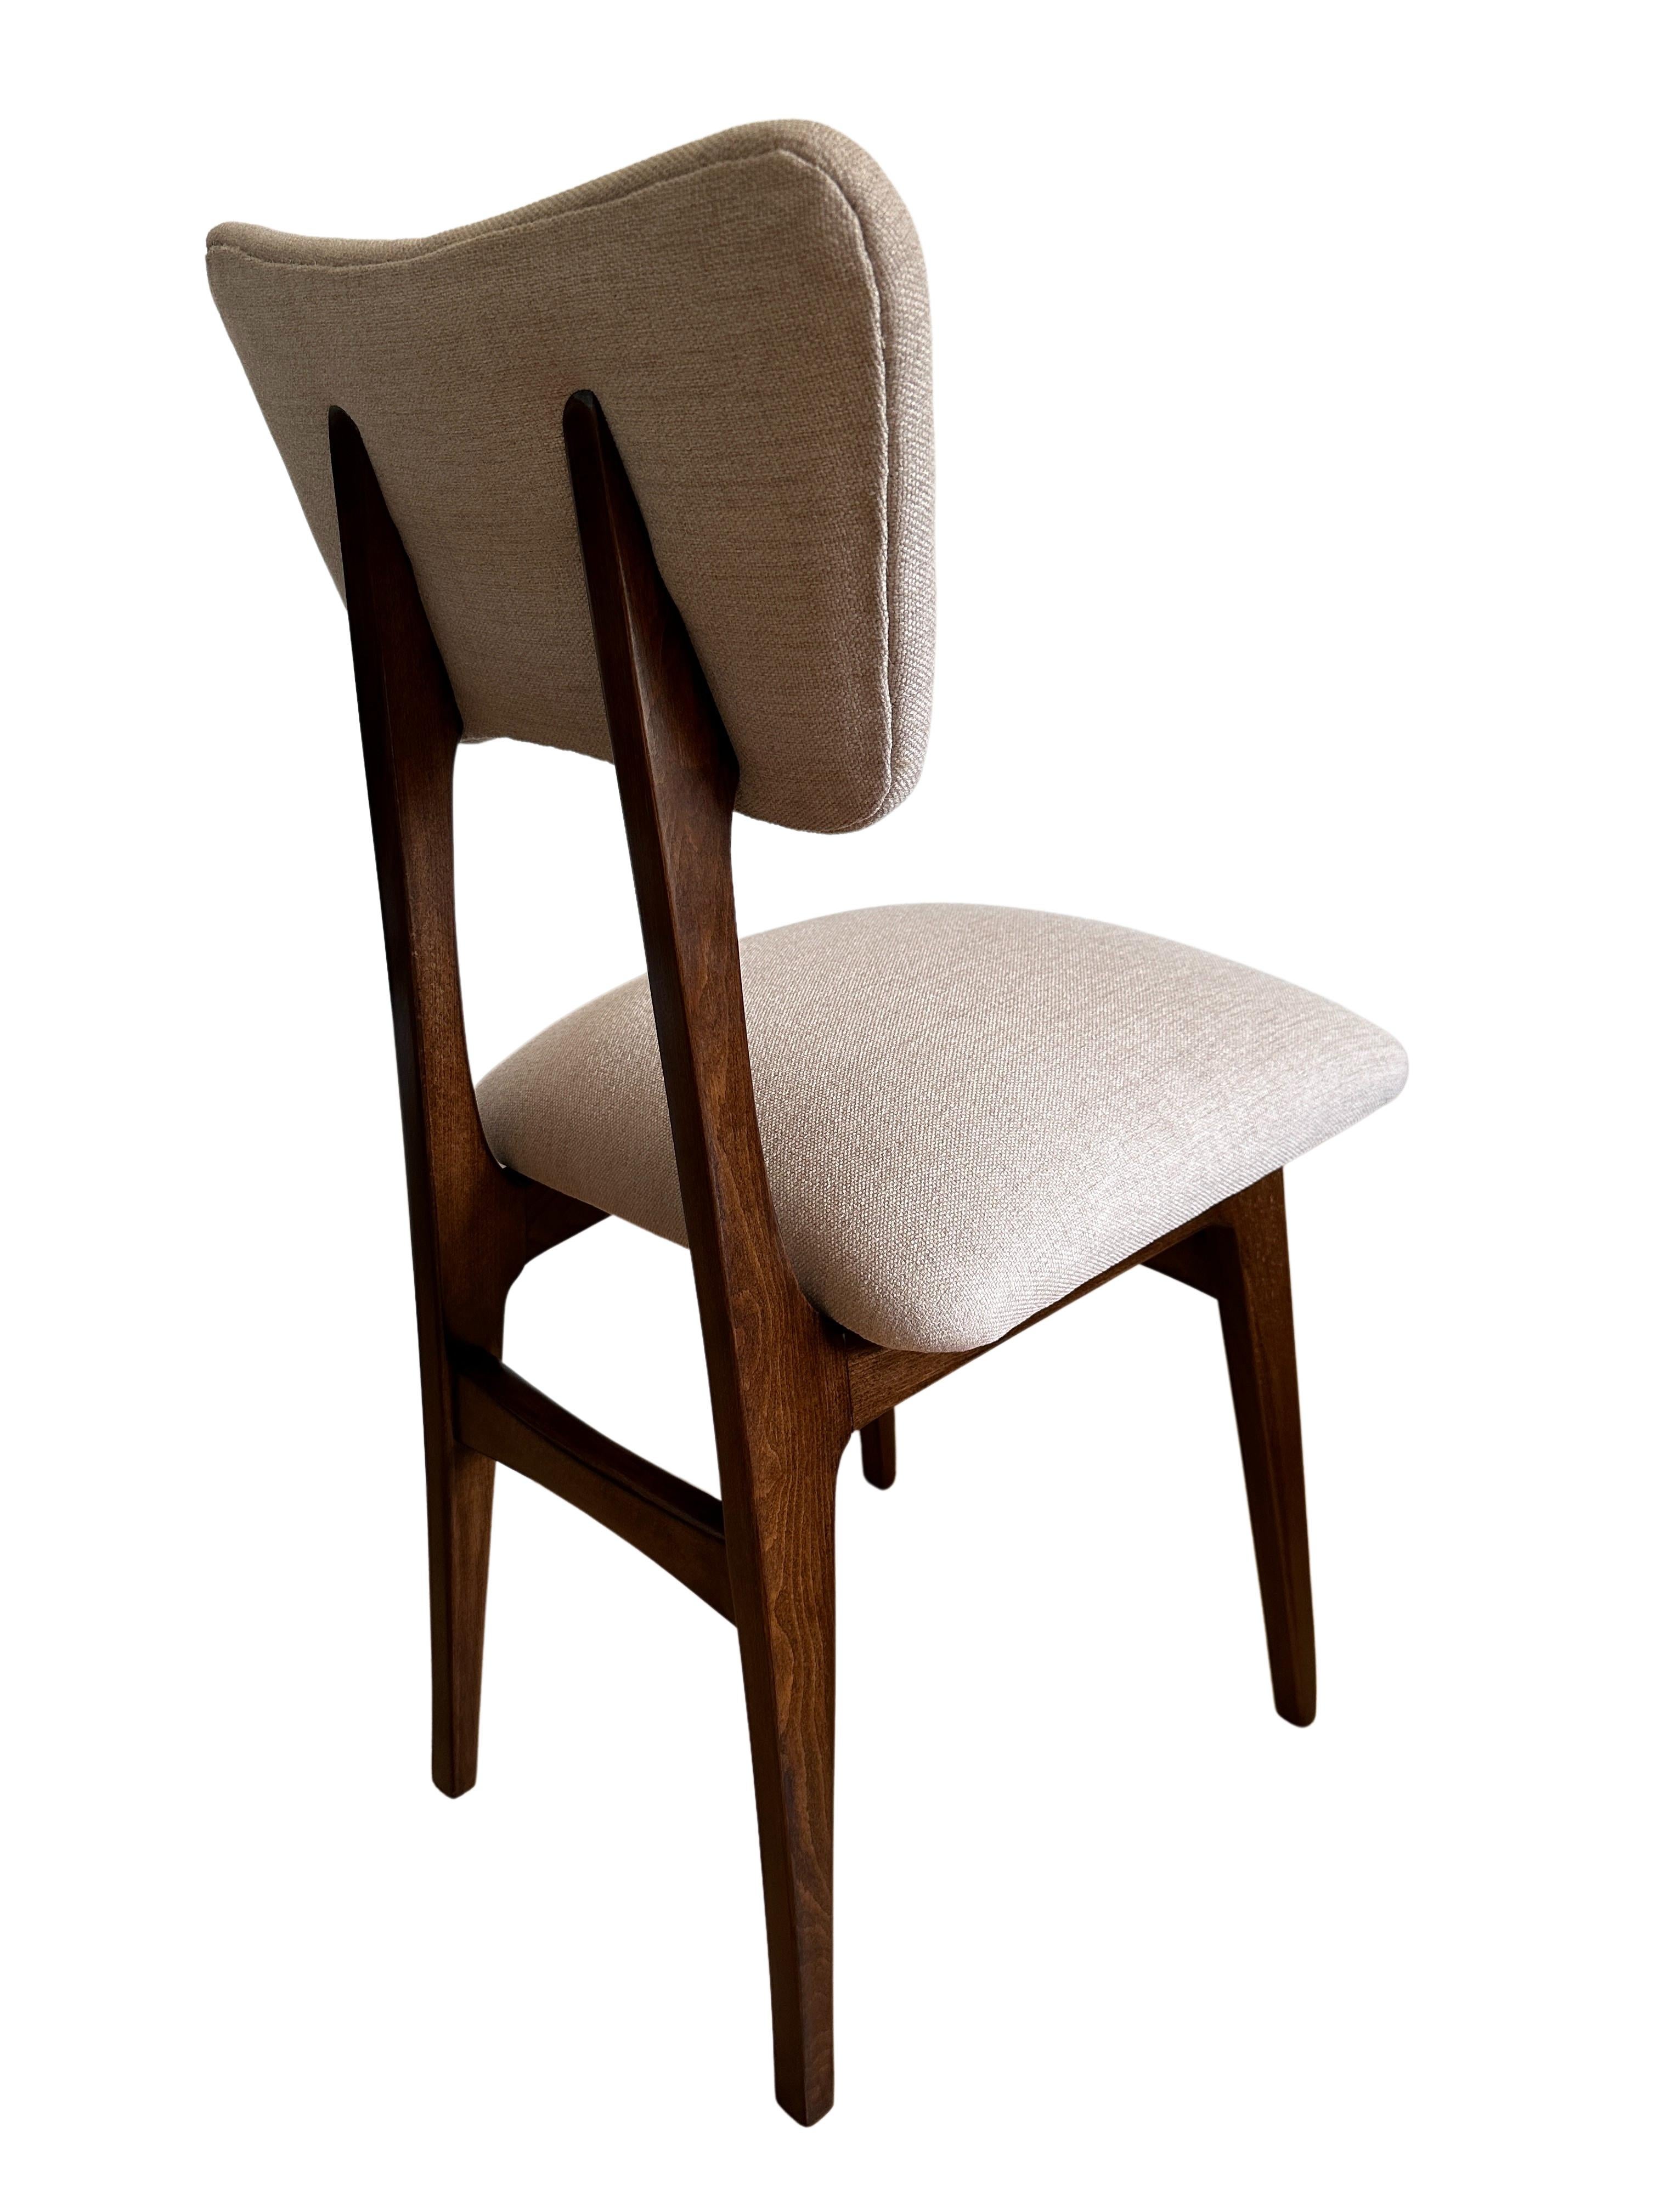 Set of Four Midcentury Beige Dining Chairs, Europe, 1960s For Sale 1